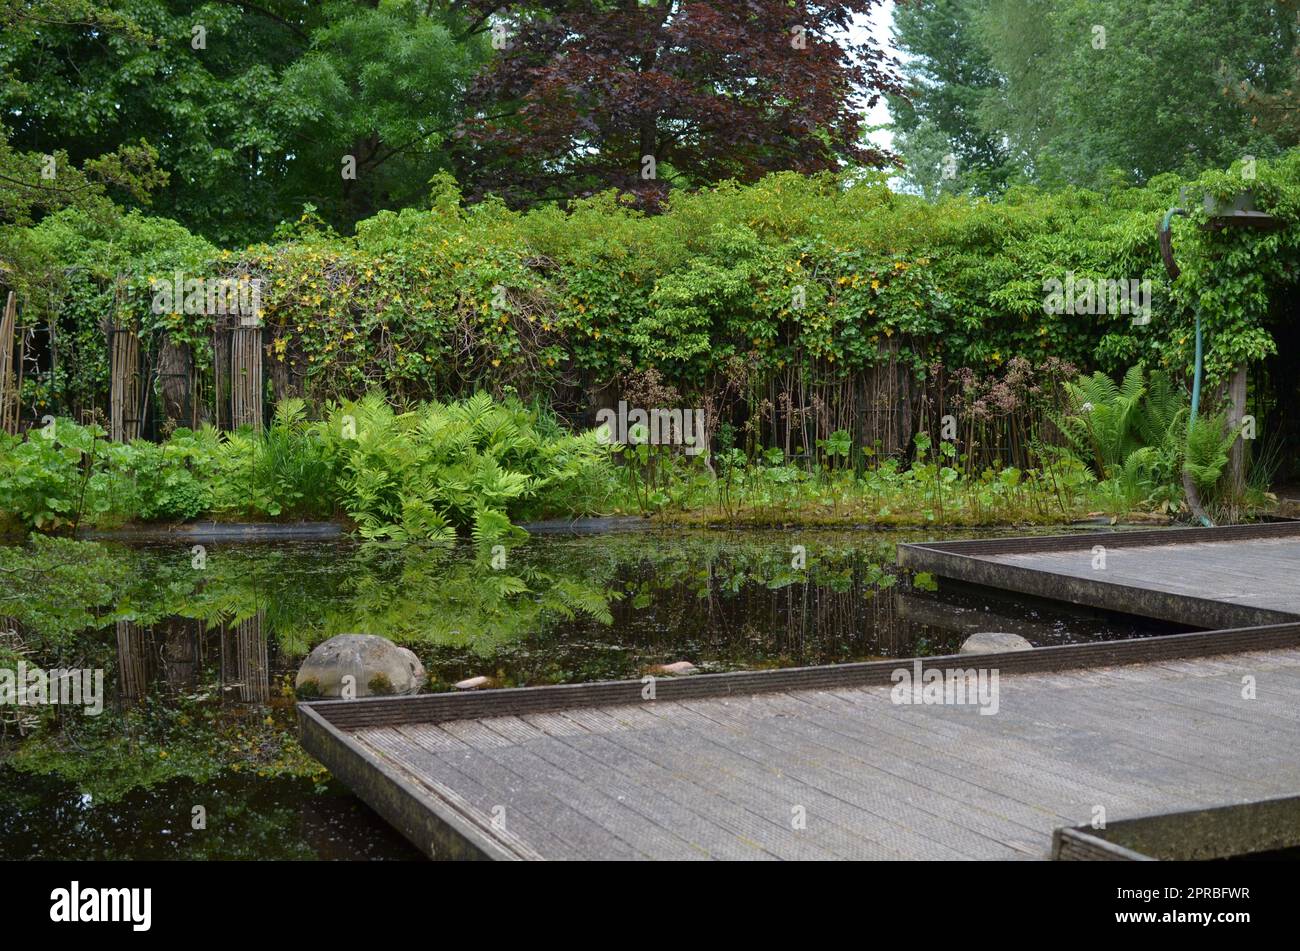 Beautiful view of wooden pond bridge and green plants in park Stock Photo